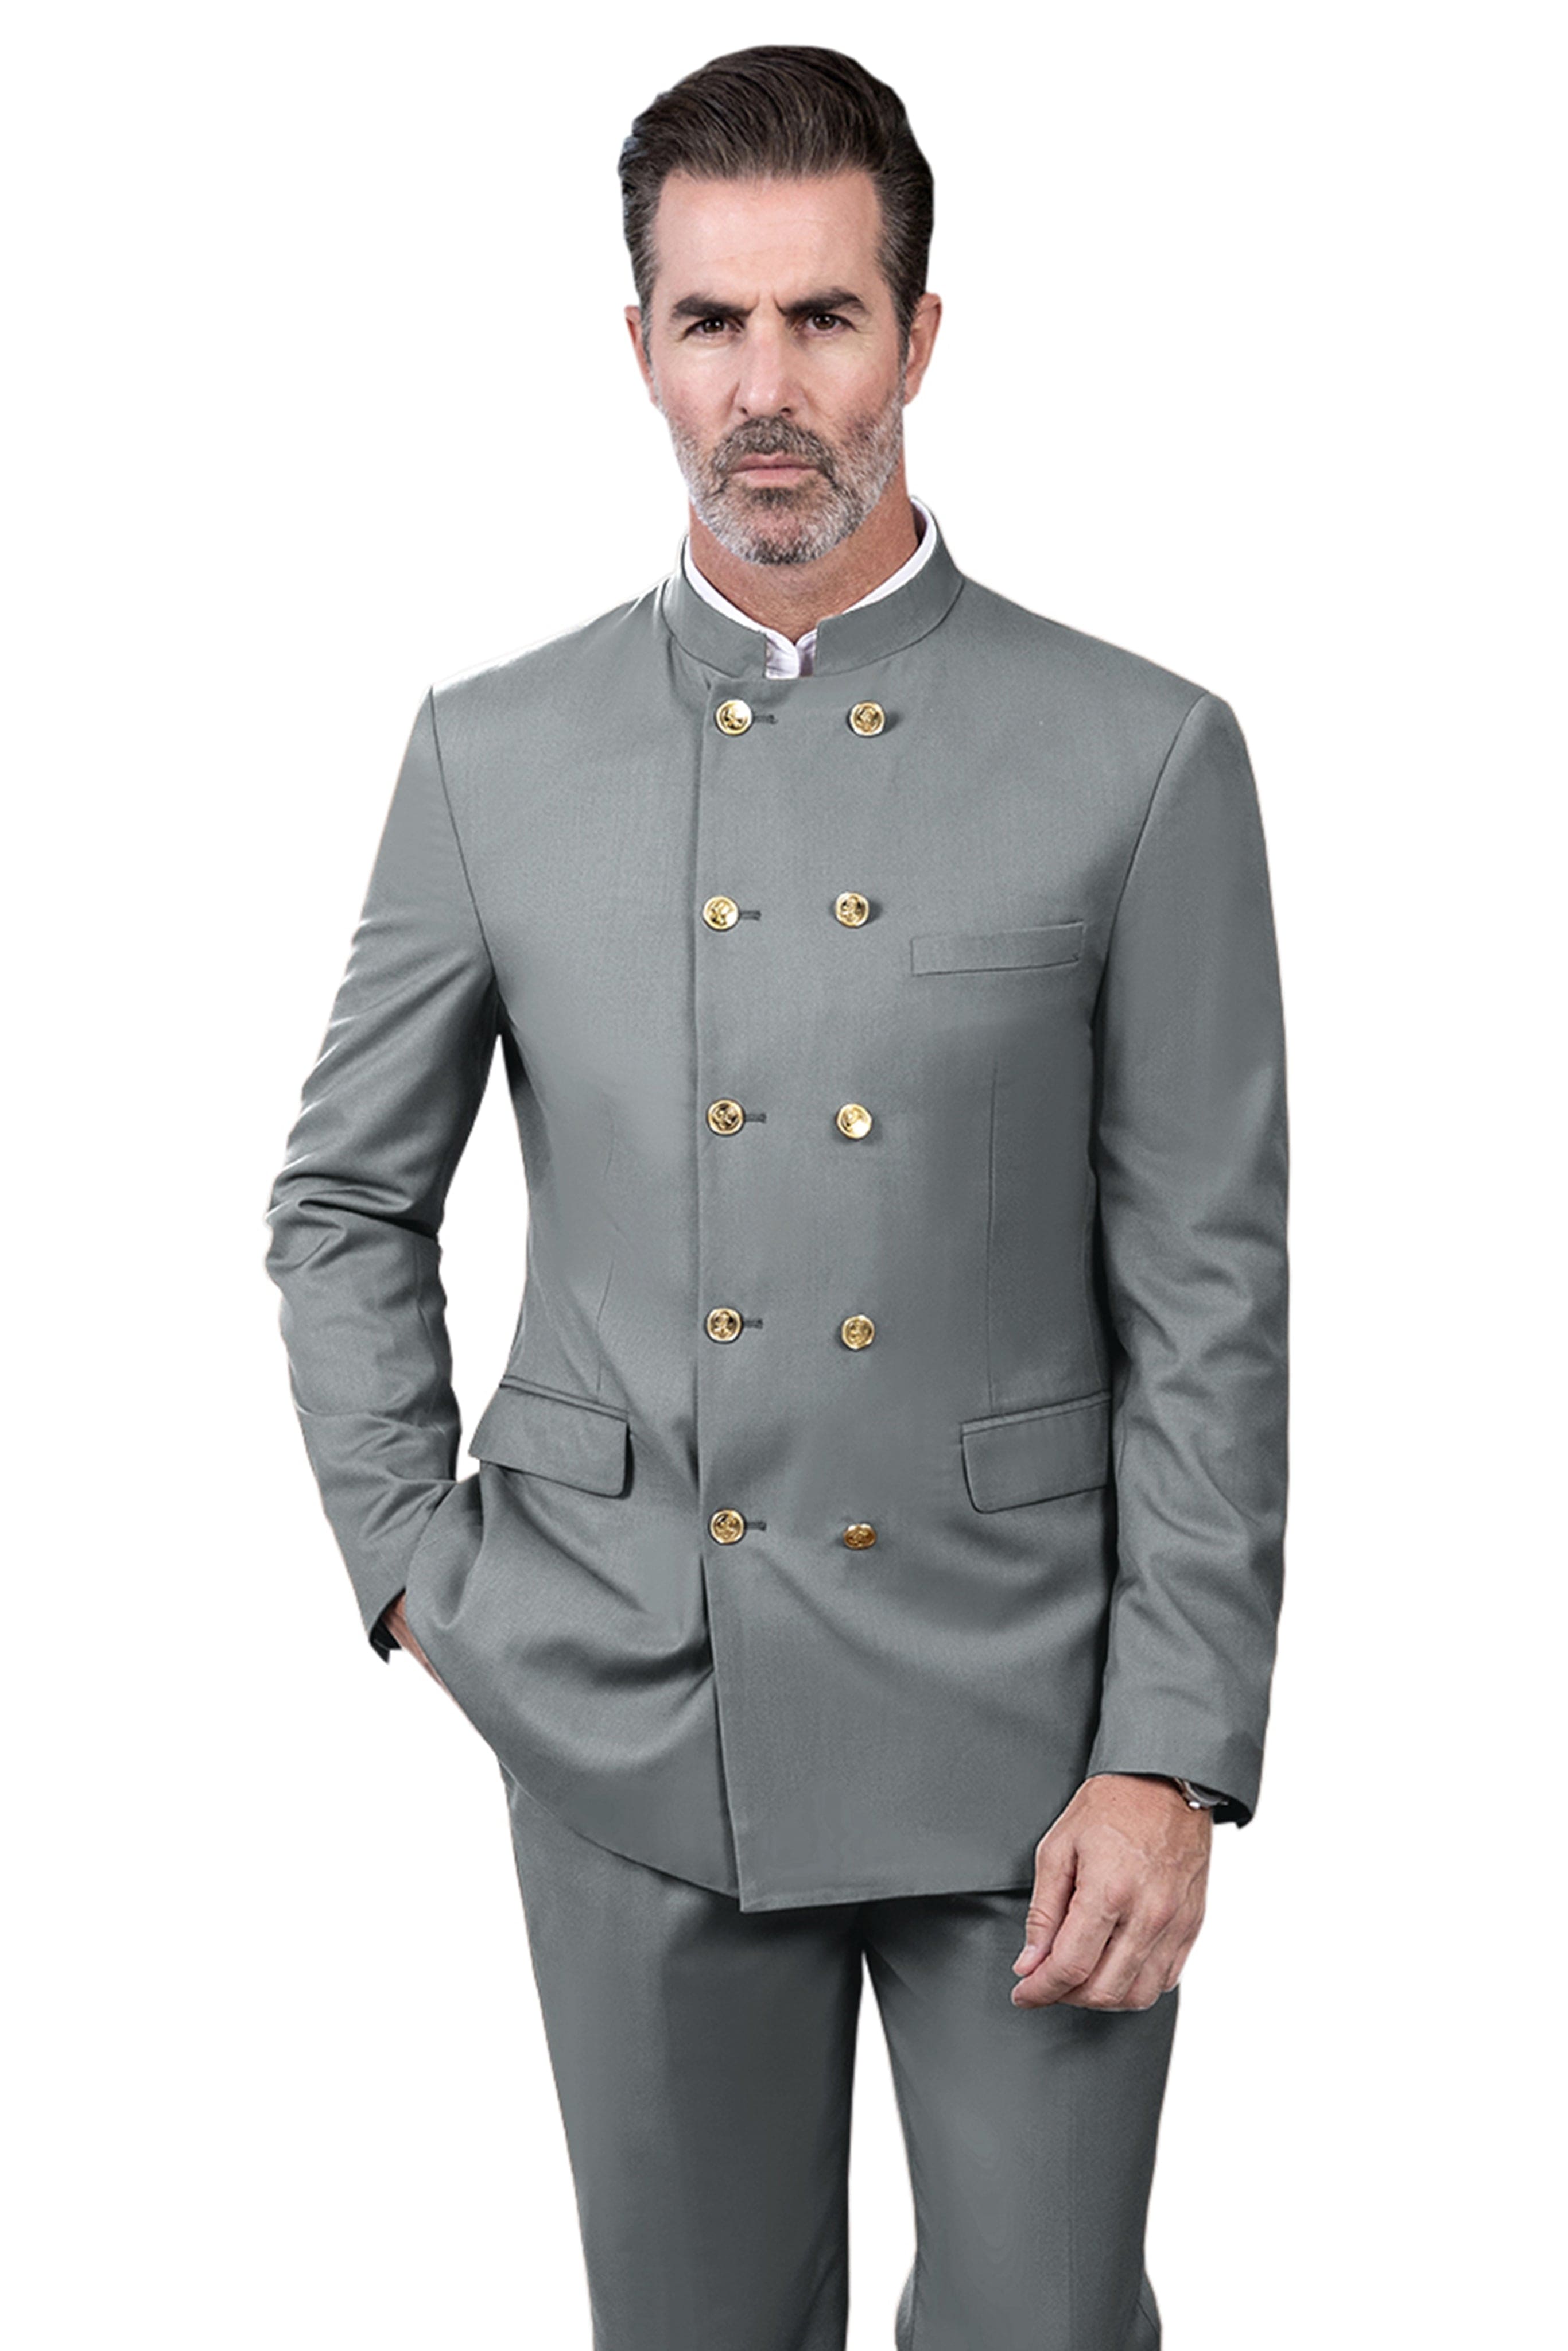 ceehuteey Men's 2 Piece With Metal Clasp Classic Fit vintage Double Breasted Suit